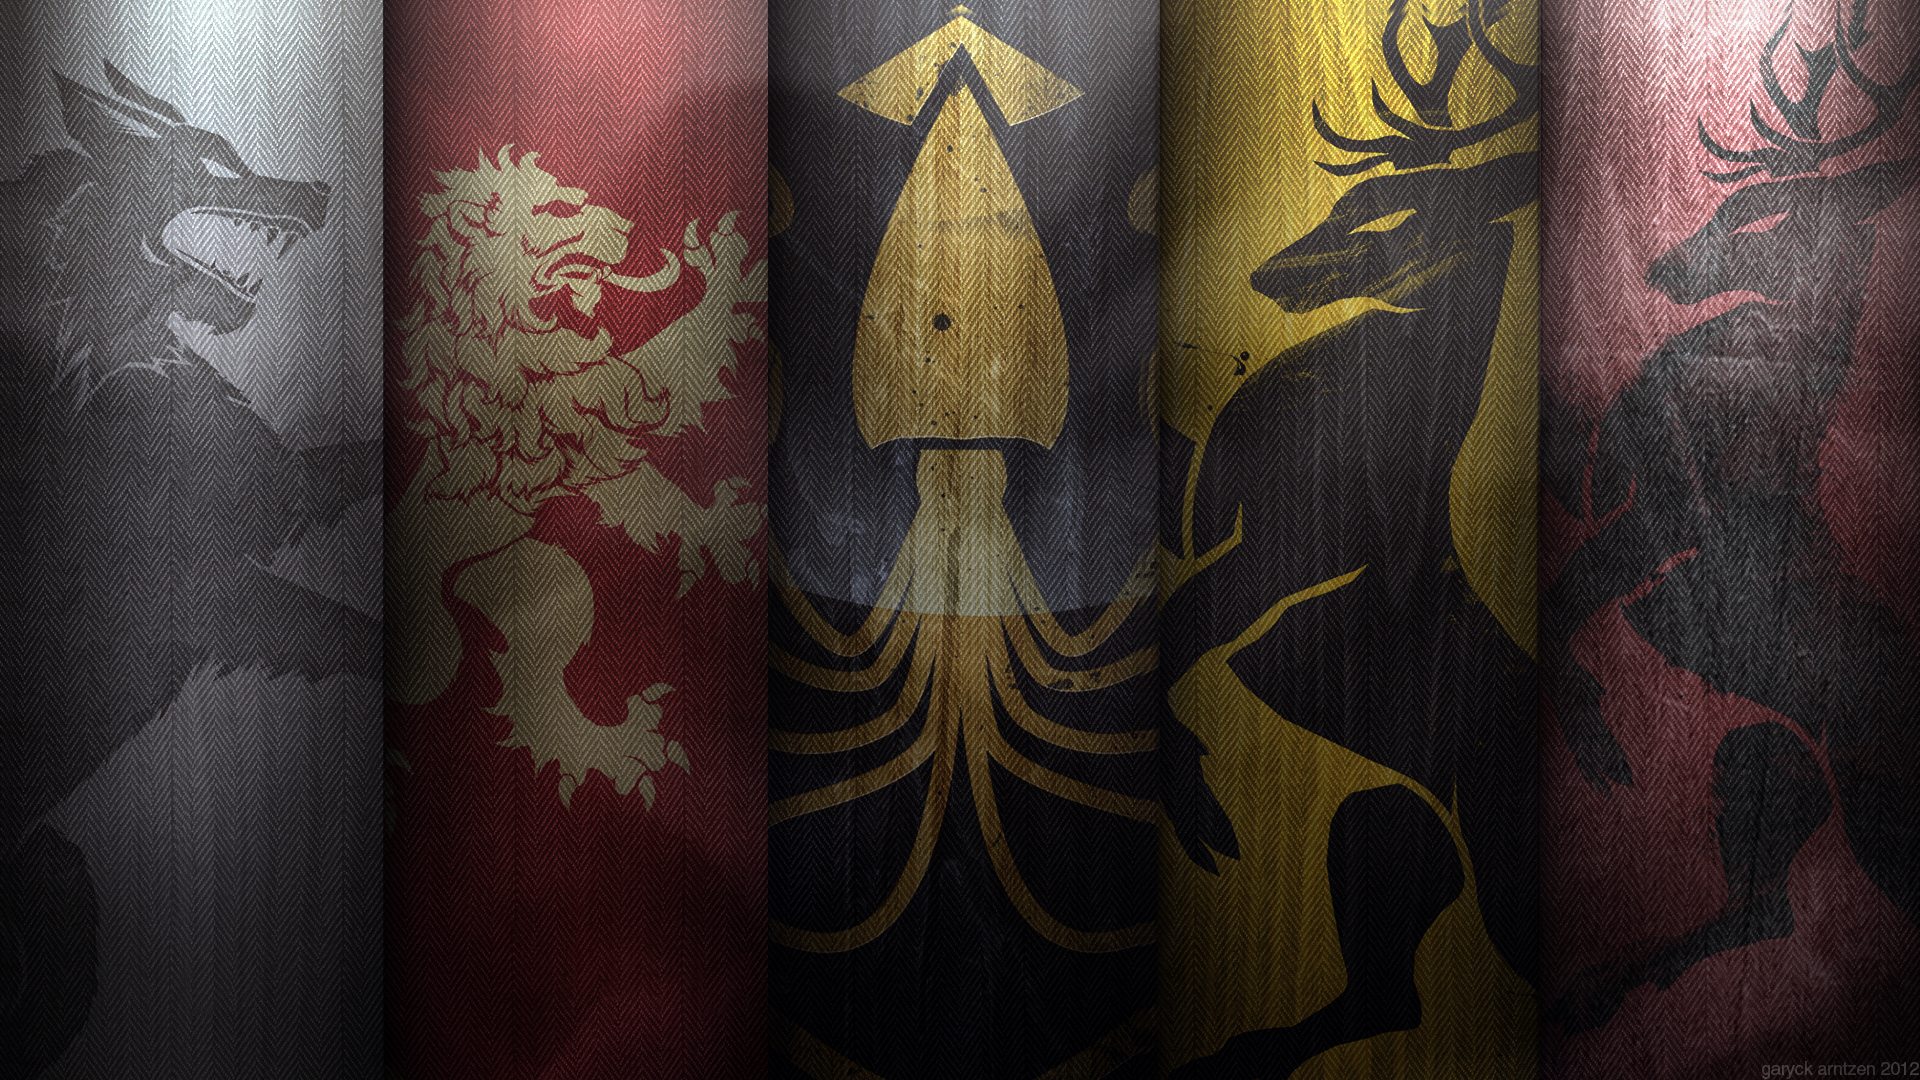 Description Game Of Thrones Wallpaper 1080p Is A Hi Res For